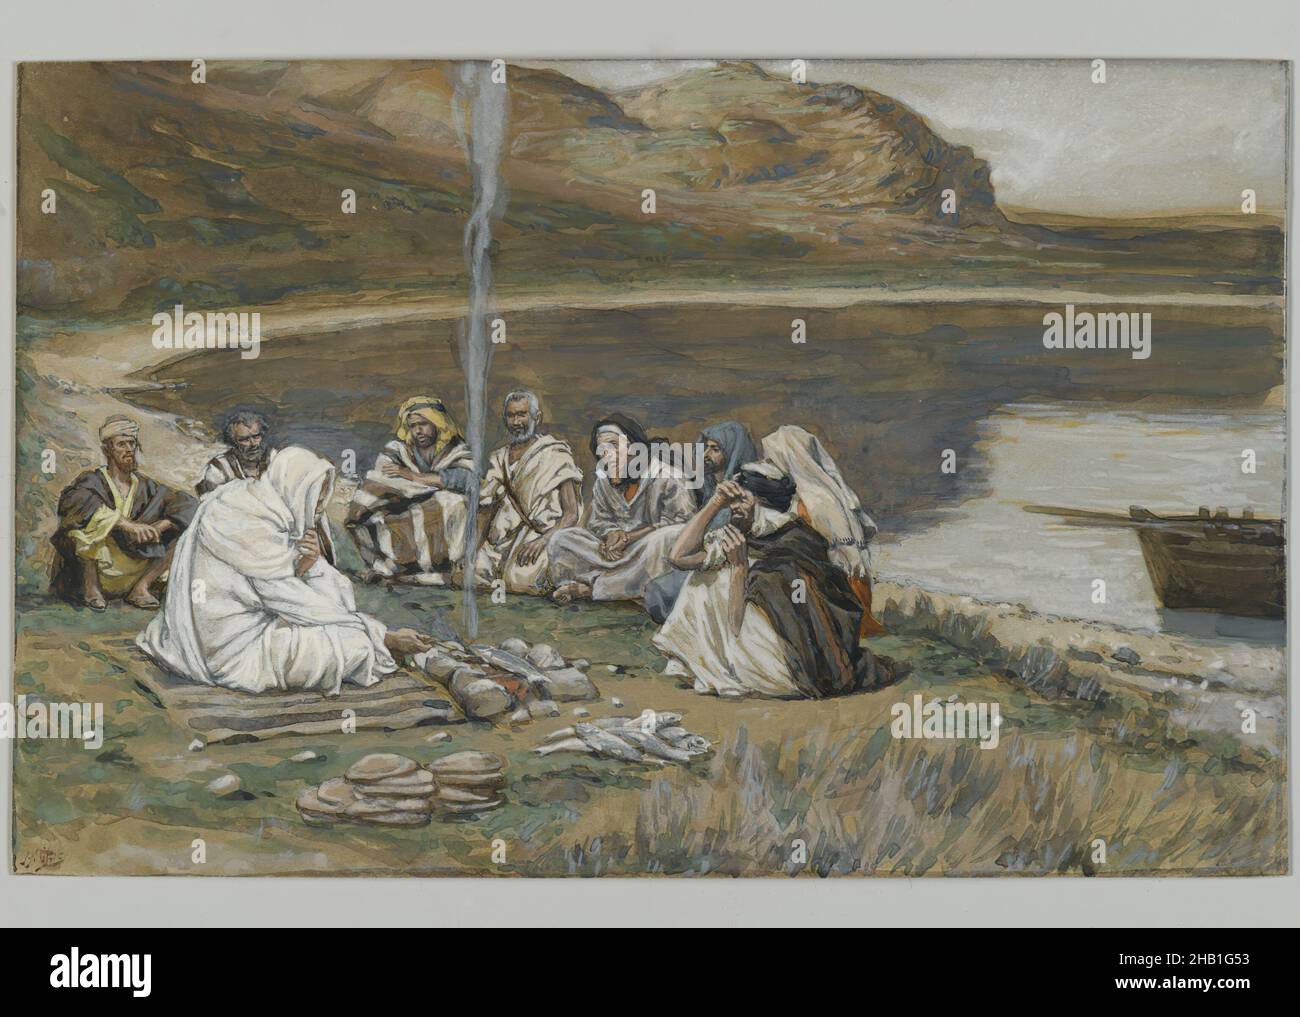 Meal of Our Lord and the Apostles, Repas de Notre-Seigneur et des apôtres, The Life of Our Lord Jesus Christ, La Vie de Notre-Seigneur Jésus-Christ, James Tissot, French, 1836-1902, Opaque watercolor over graphite on gray wove paper, France, 1886-1894, Image: 5 15/16 x 9 5/16 in., 15.1 x 23.7 cm, Apostles, Christianity, Jesus Christ, John 21:12-13, John 21:9, landscape, lifestyle, male figures, men, religious art, seated figures, water Stock Photo